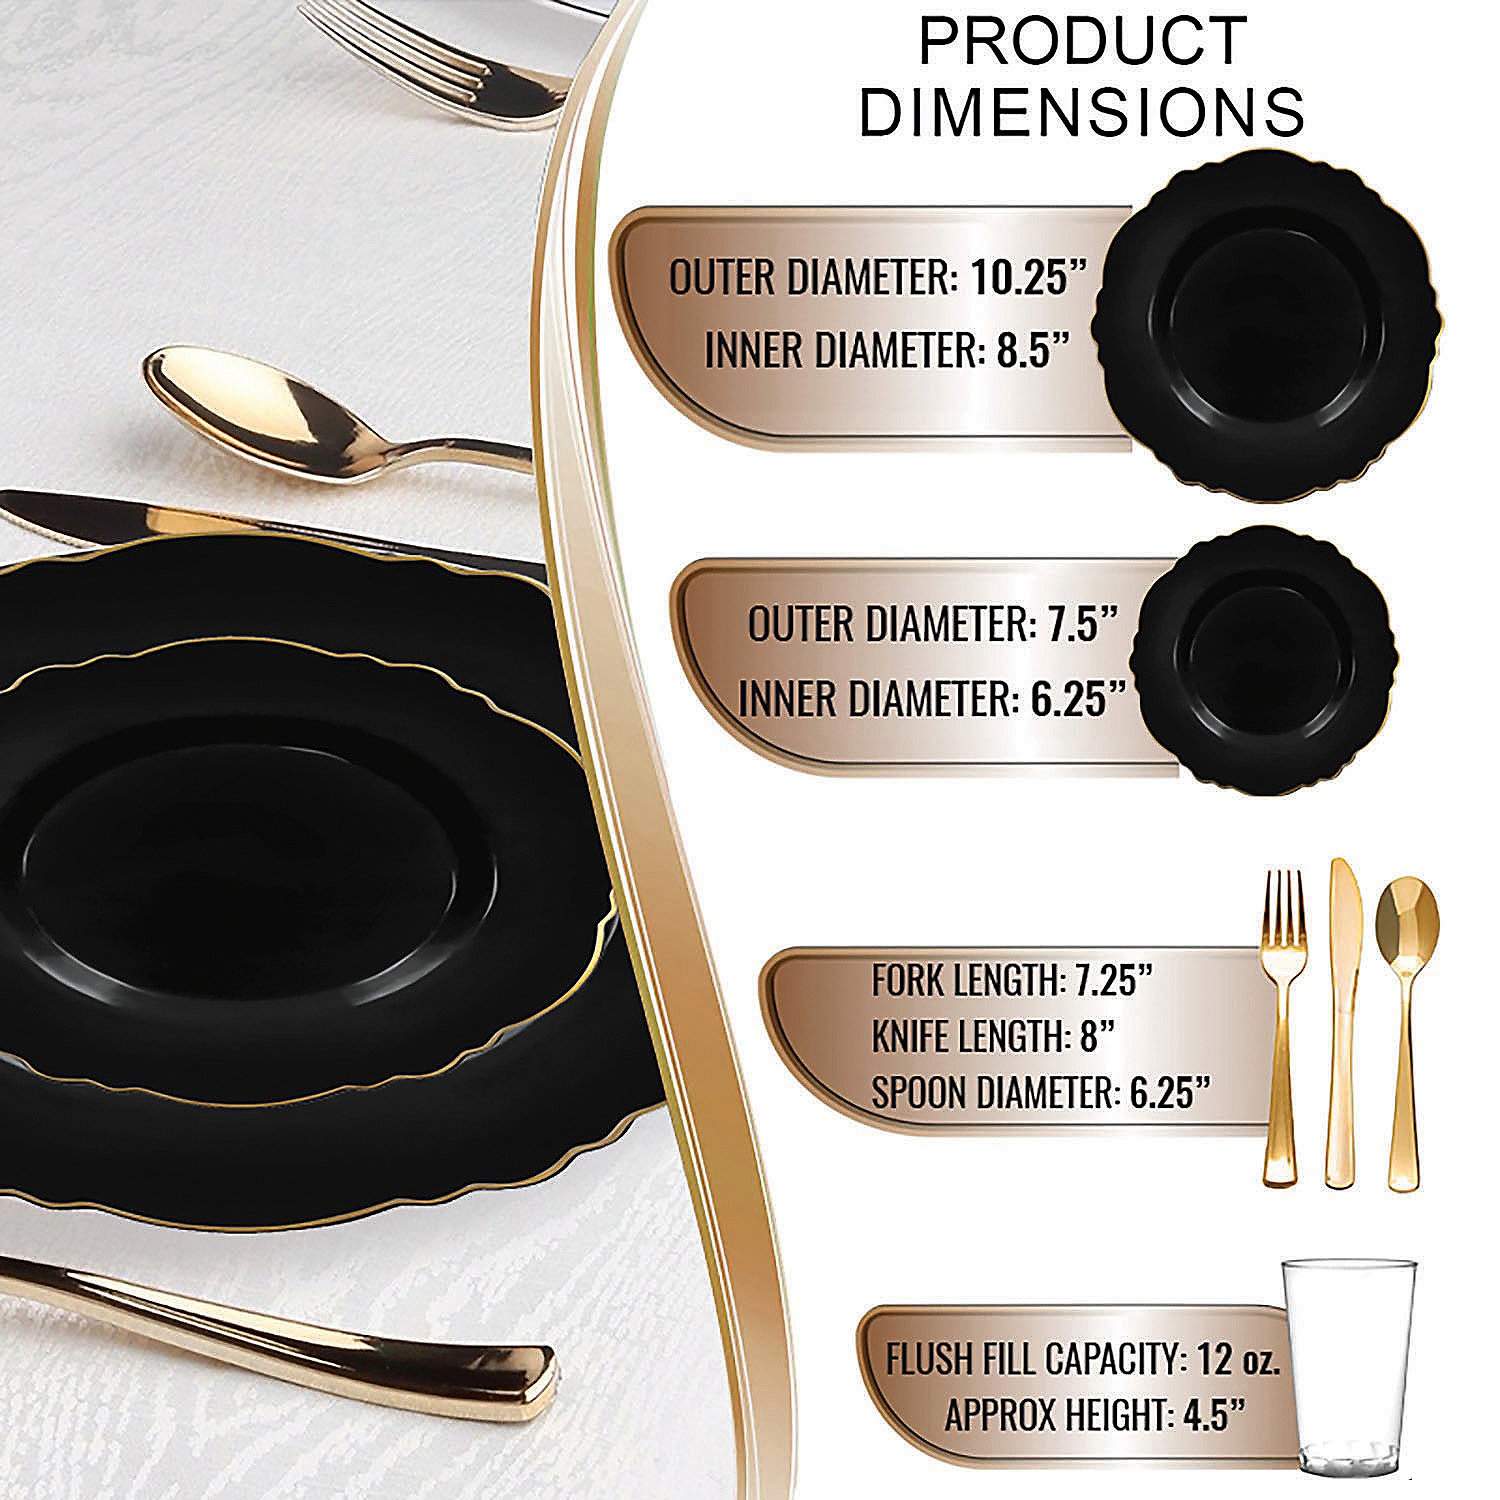 black-with-gold-rim-round-blossom-disposable-plastic-dinnerware-value-set-20-settings_14274139-a01